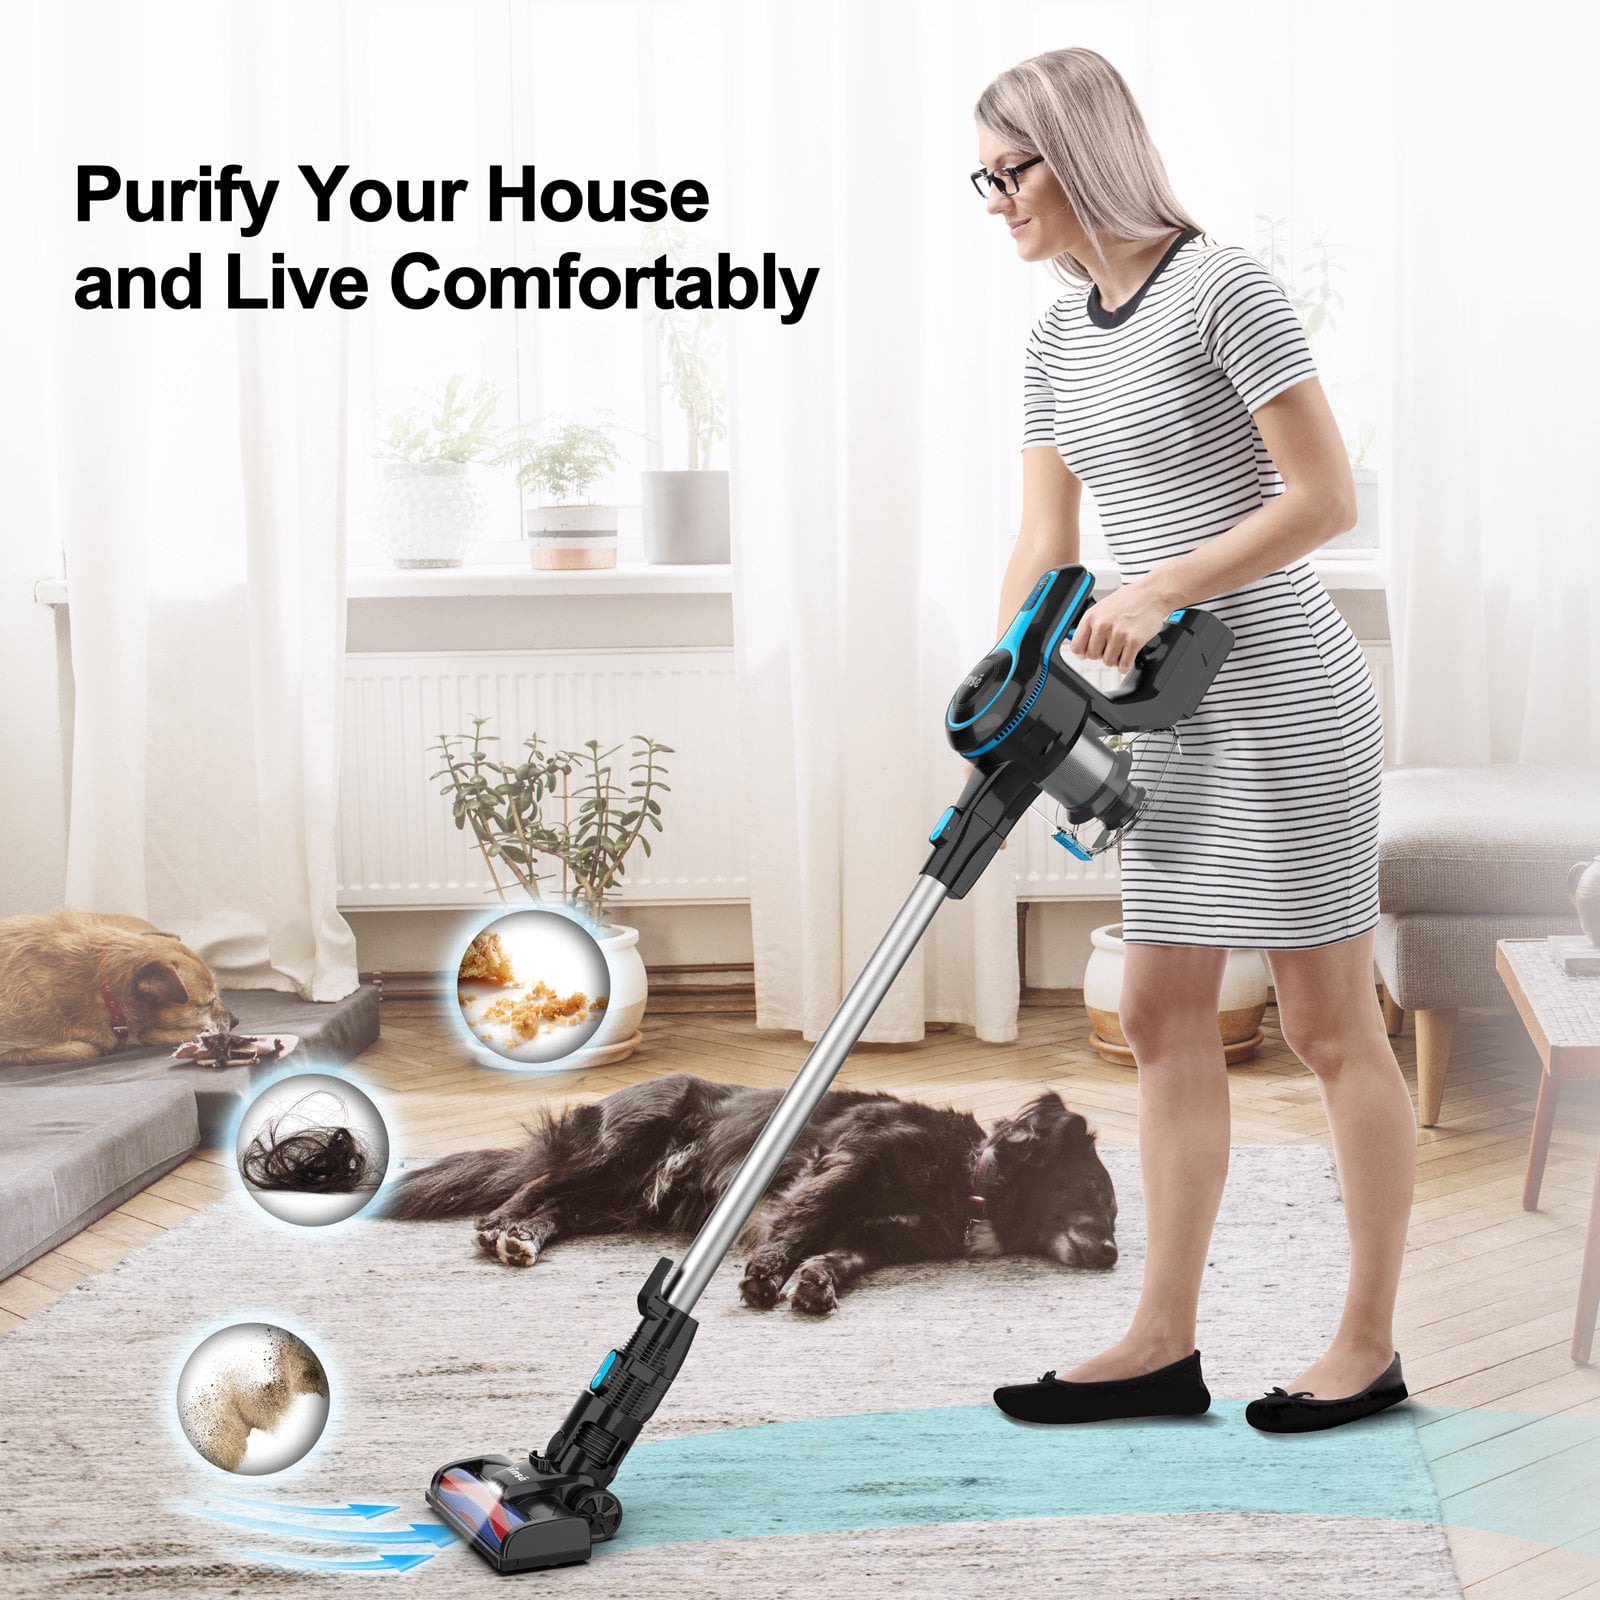 INSE N500 Cordless Vacuum Cleaner, 6 in 1 Rechargeable Powerful Lightweight Stick Vacuum with 2200 mAh Battery for Home Hard Floor Carpet Pet Hair - Light Blue - 3